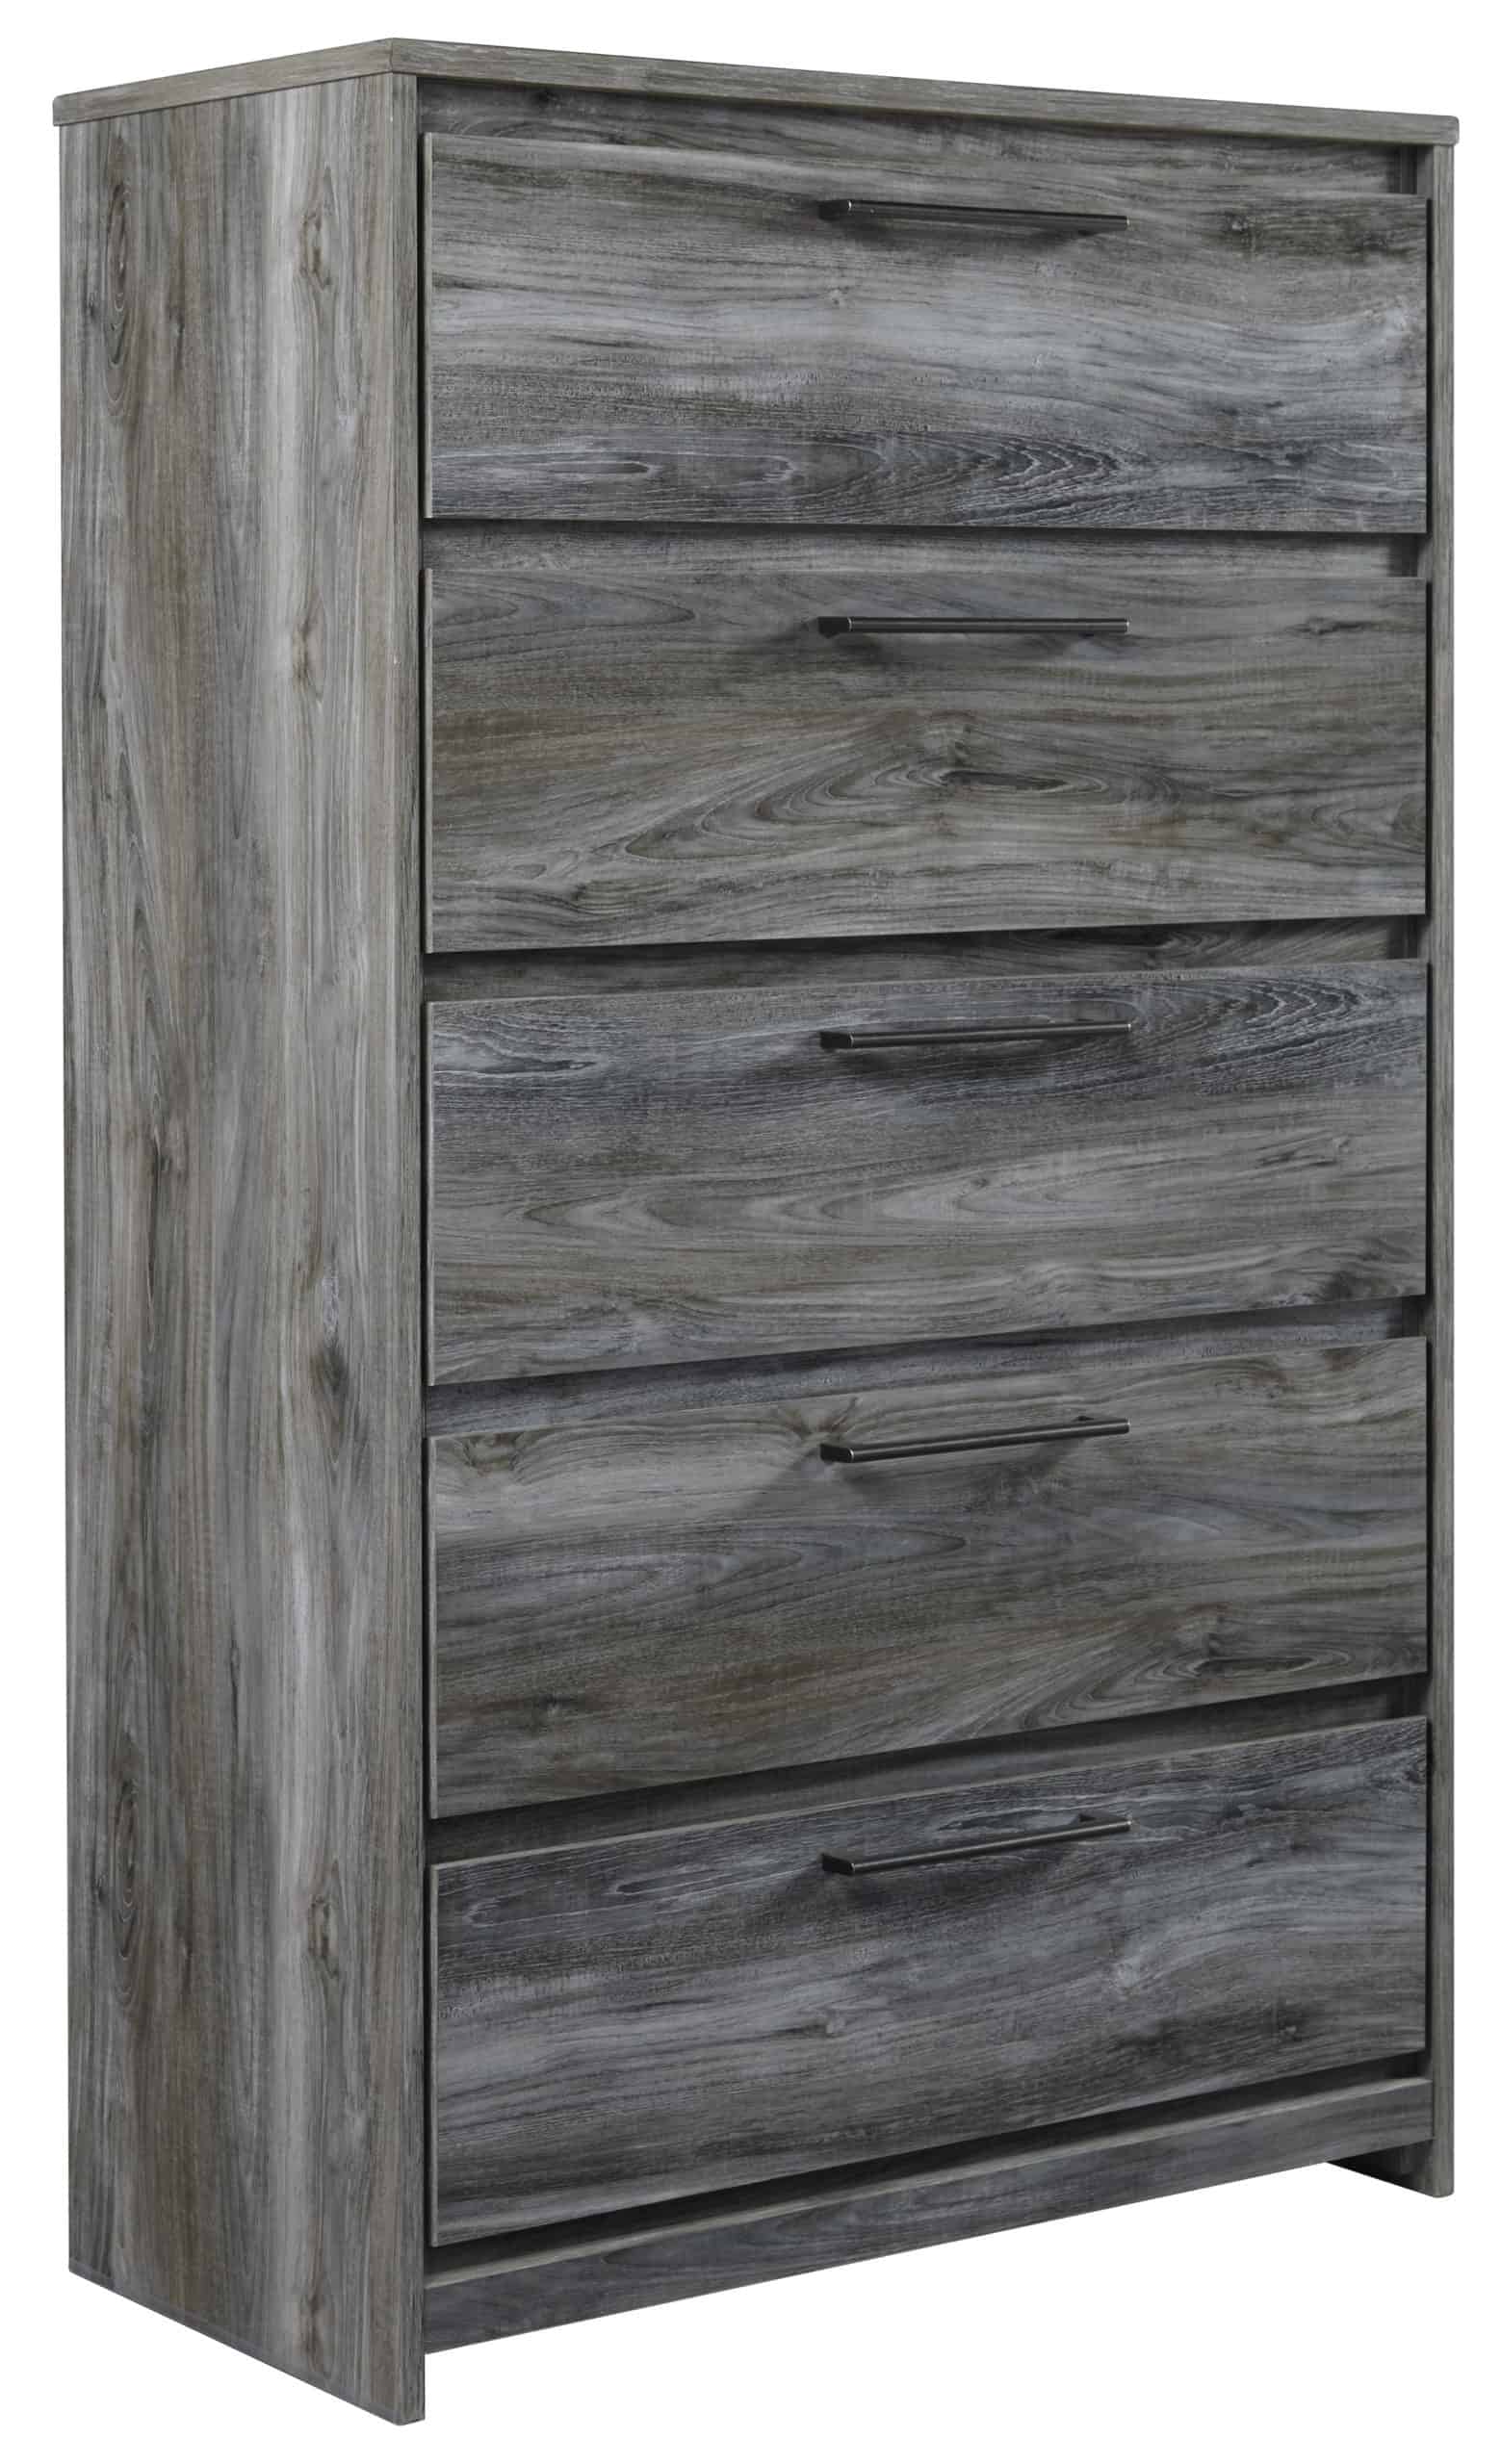 Baystorm Chest. The Baystorm with its smokey driftwood and sconce lights give this bed a rustic look that's perfect for creating an island oasis.